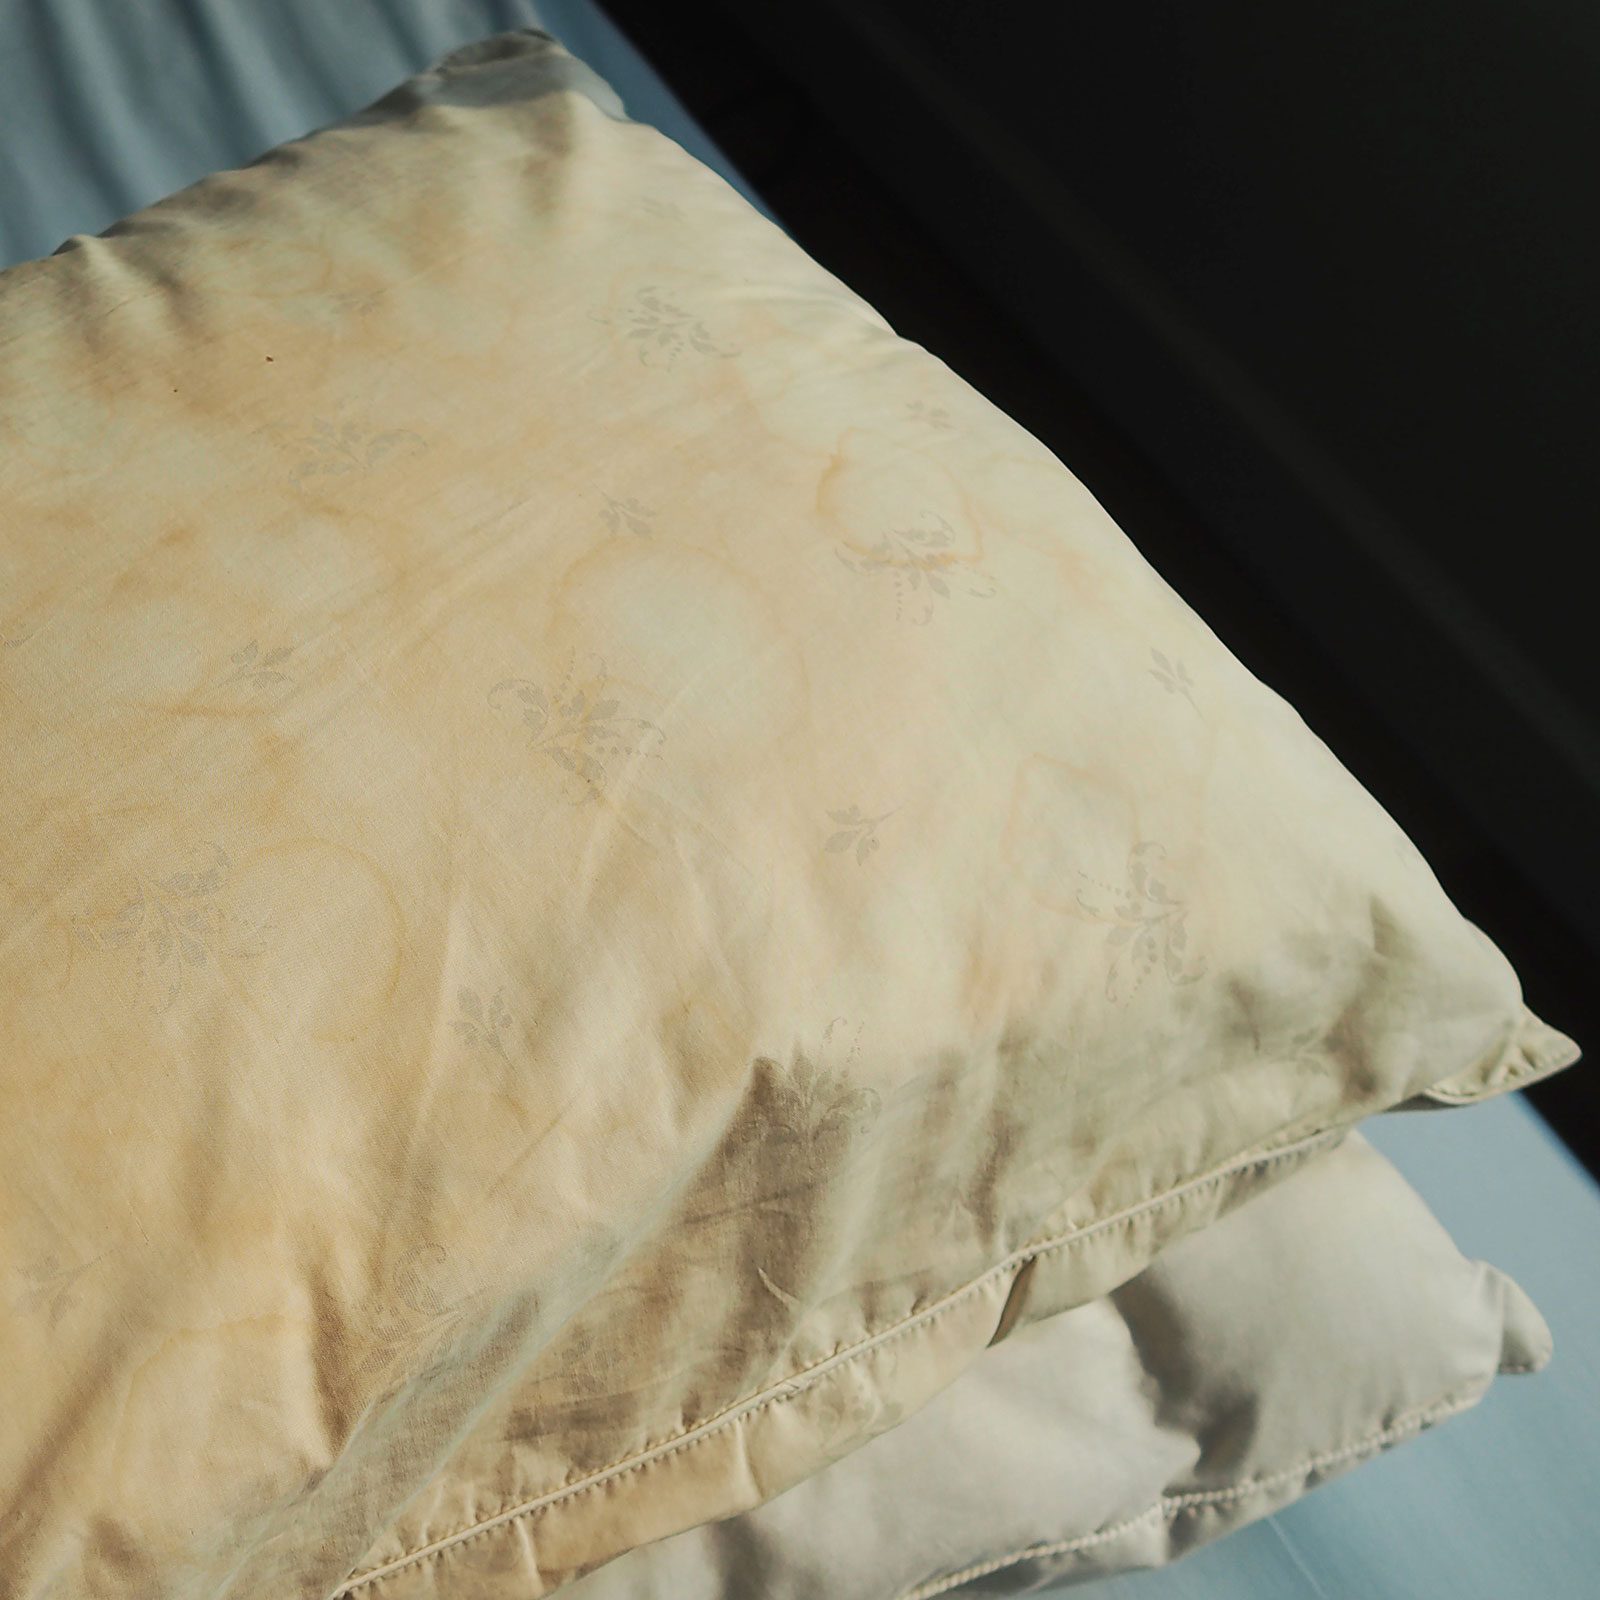 Dirty Pillow From Saliva Stain On The Bed